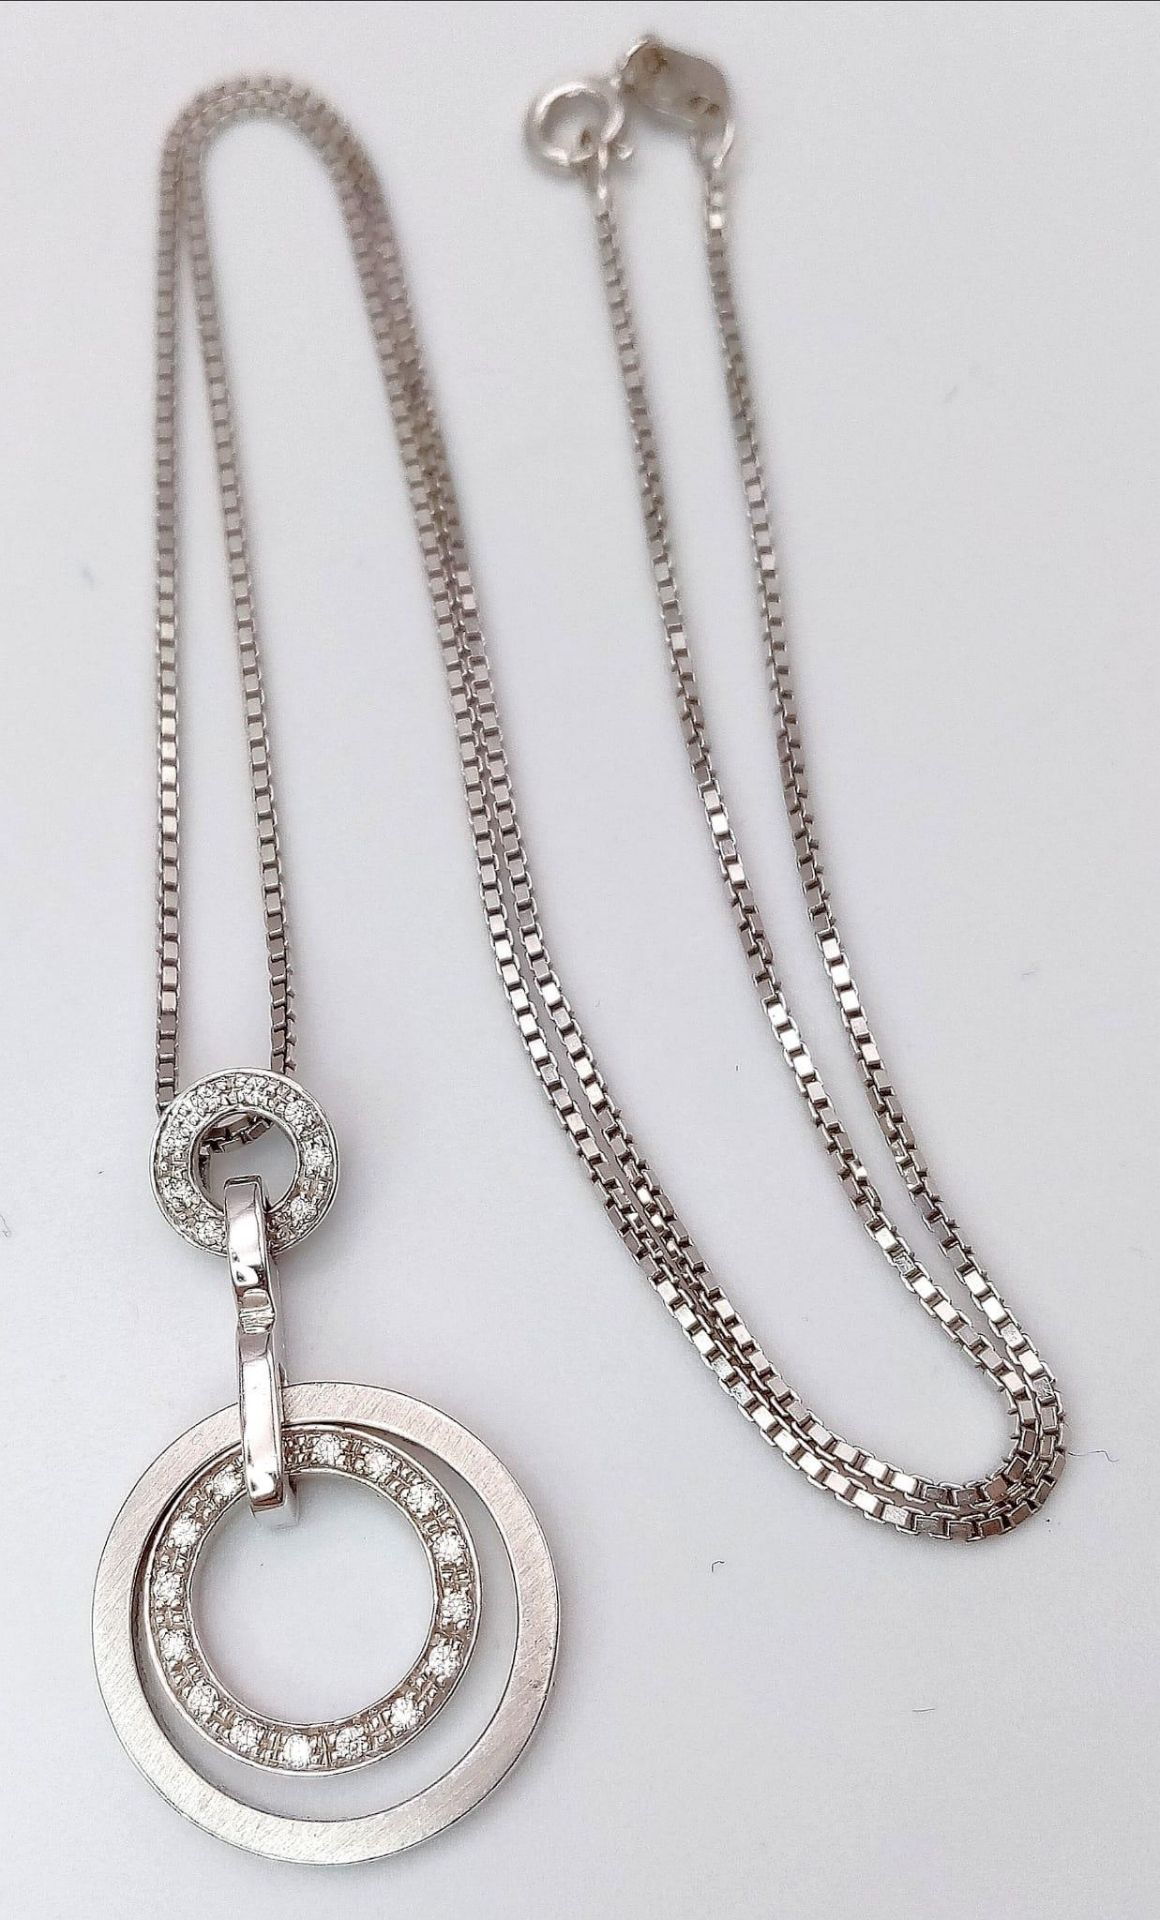 An 18K White Gold Diamond Set Circular Articulated Pendant on a Box Chain. 7.9g total weight. 16"